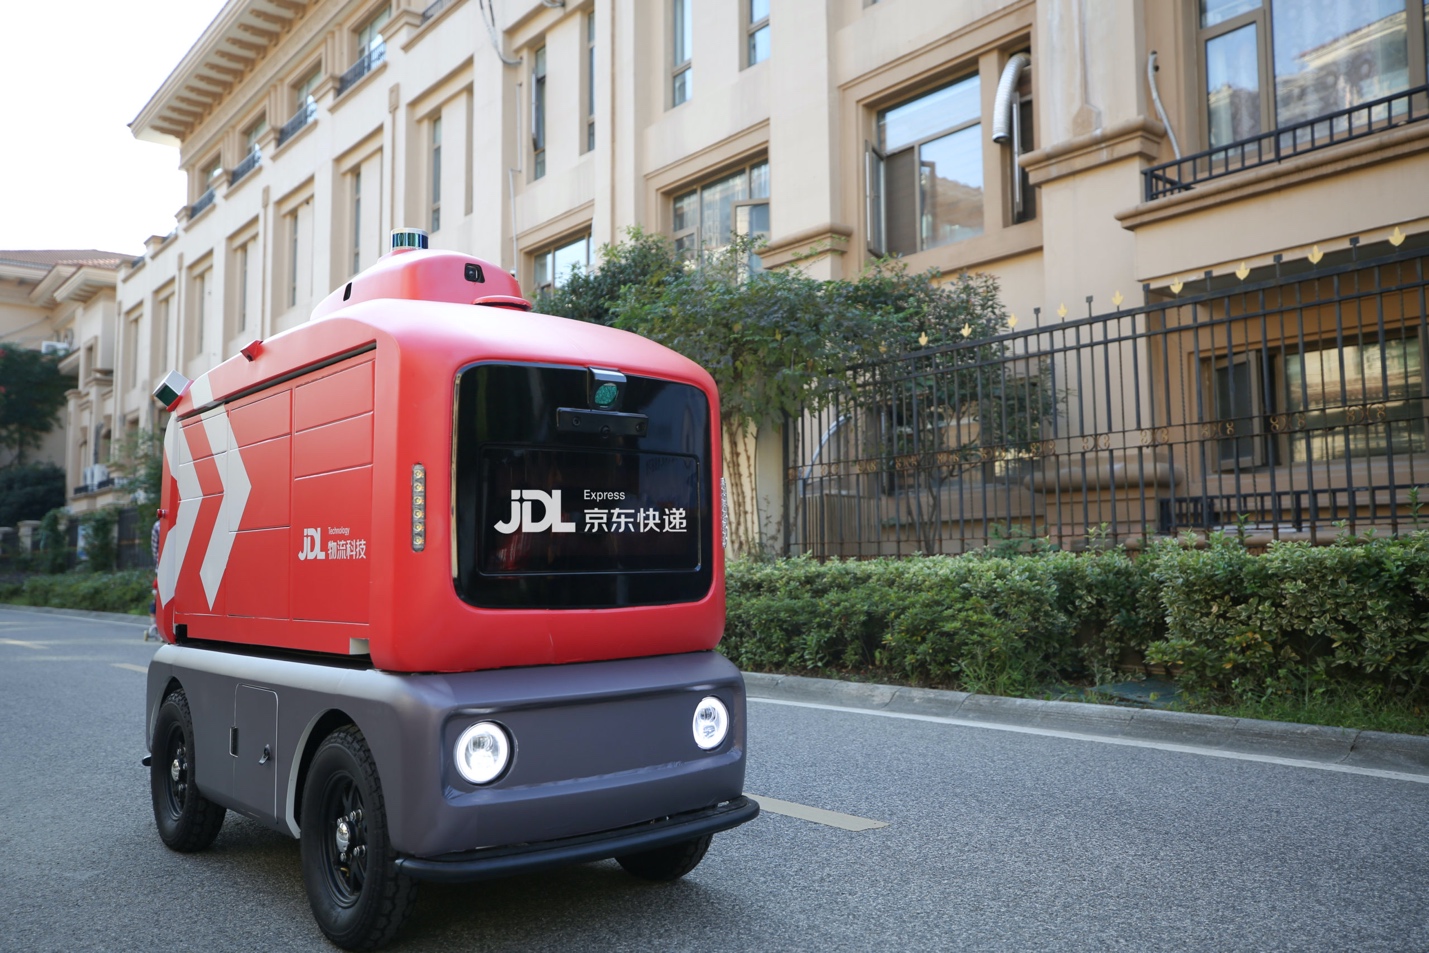 JD Adopts Smart Delivery Vehicle in Shijiazhuang - JD Corporate Blog